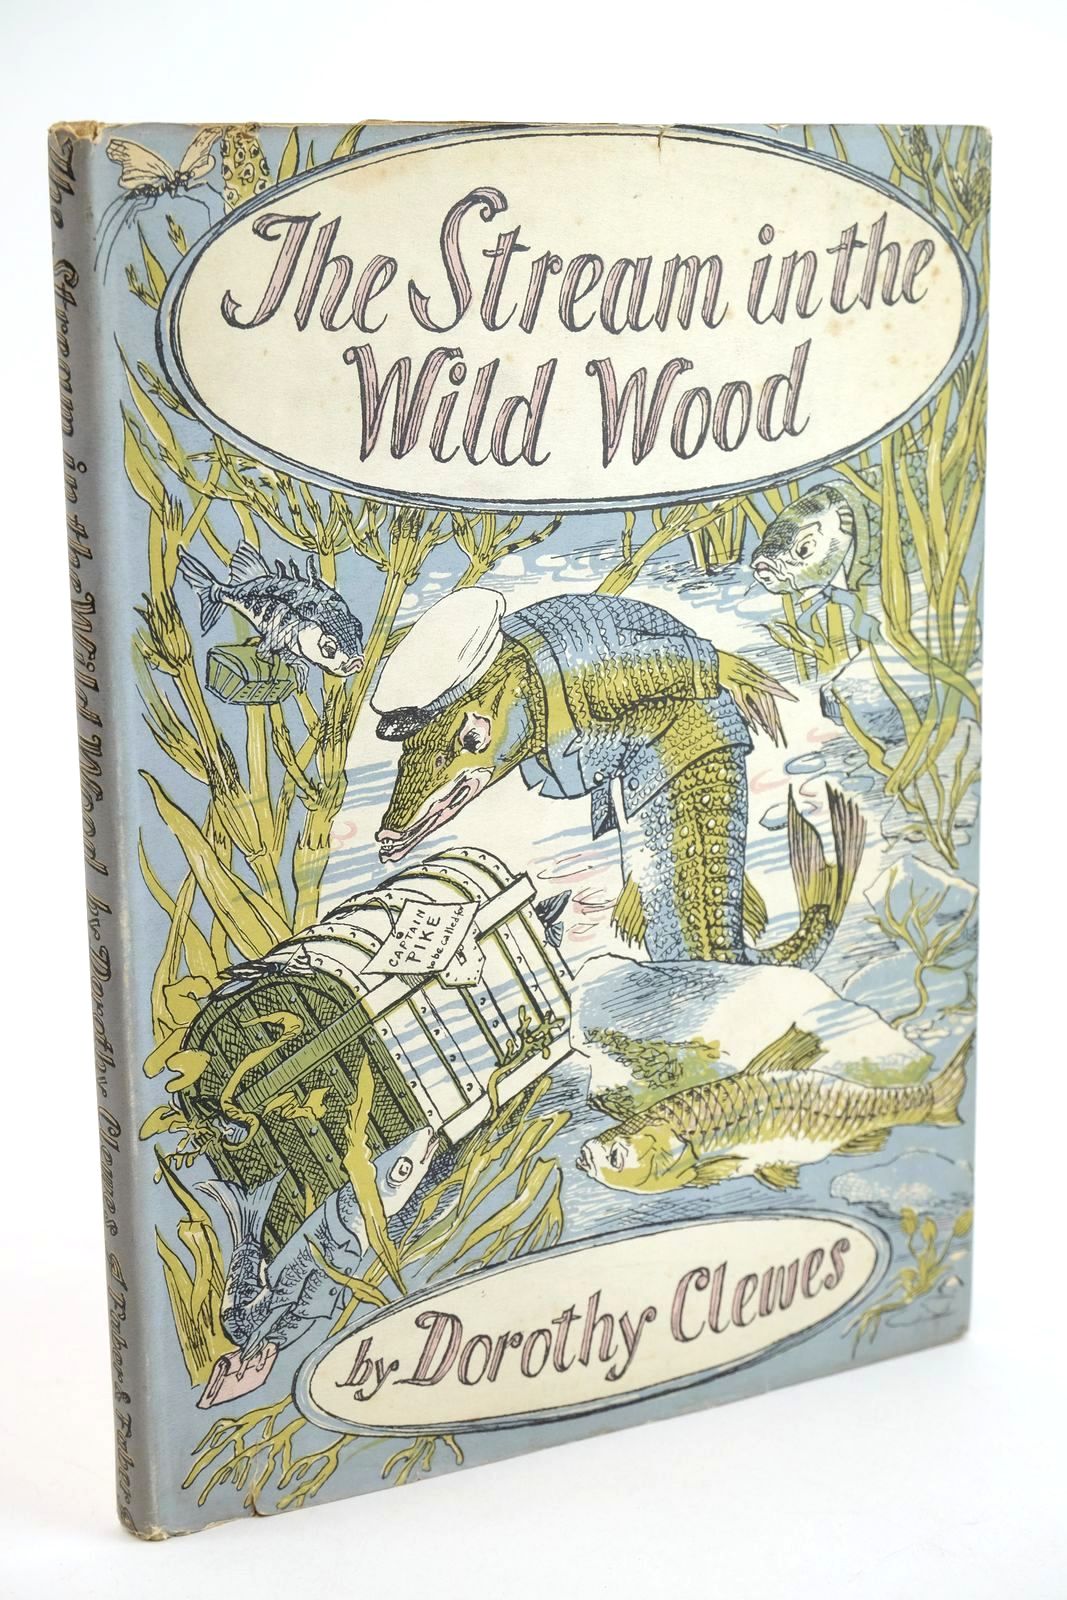 Photo of THE STREAM IN THE WILD WOOD written by Clewes, Dorothy illustrated by Hawkins, Irene published by Faber & Faber Ltd. (STOCK CODE: 1323776)  for sale by Stella & Rose's Books